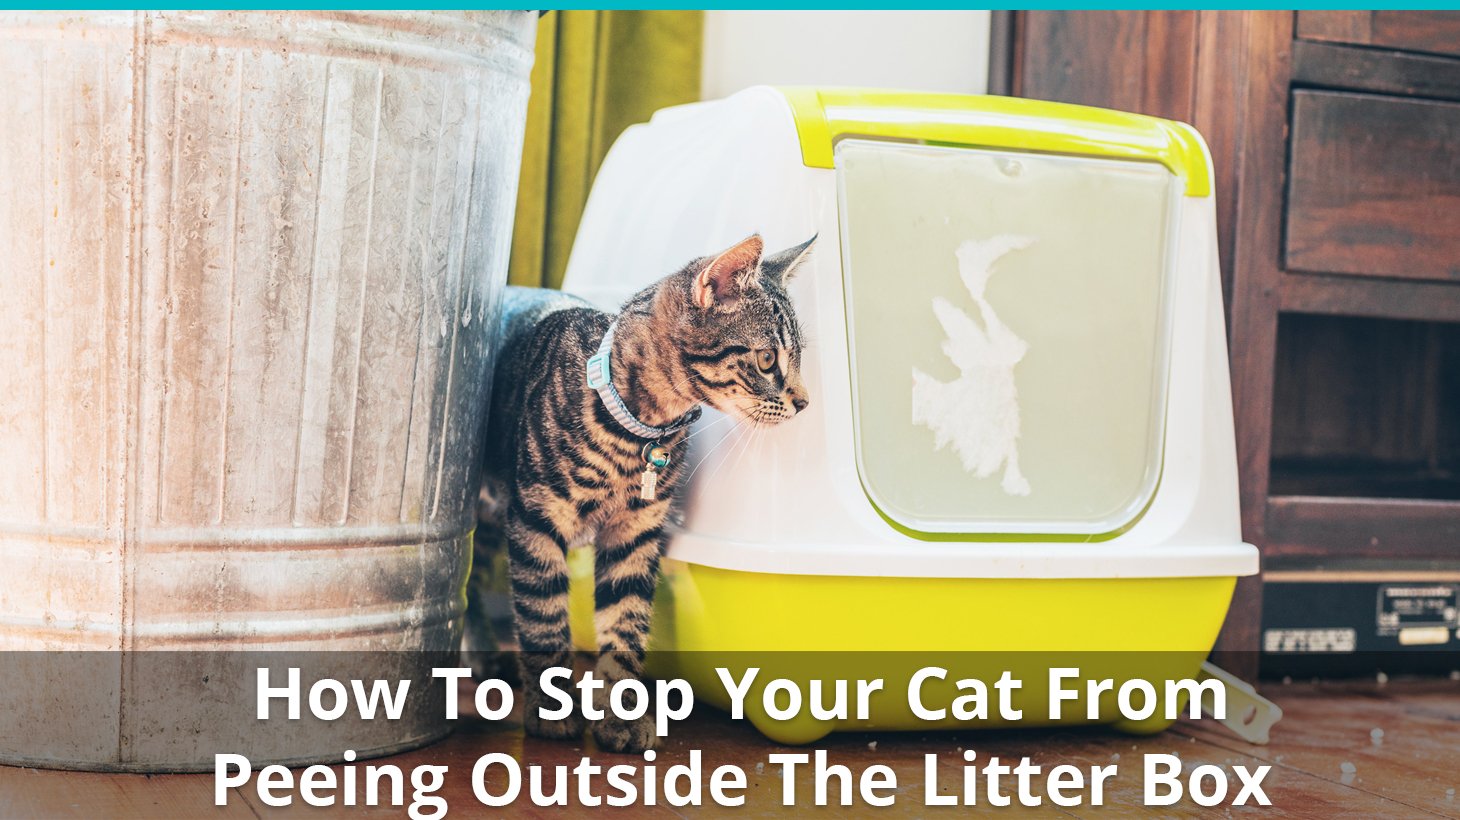 Things To Do When Your Old Cat Peeing Everywhere